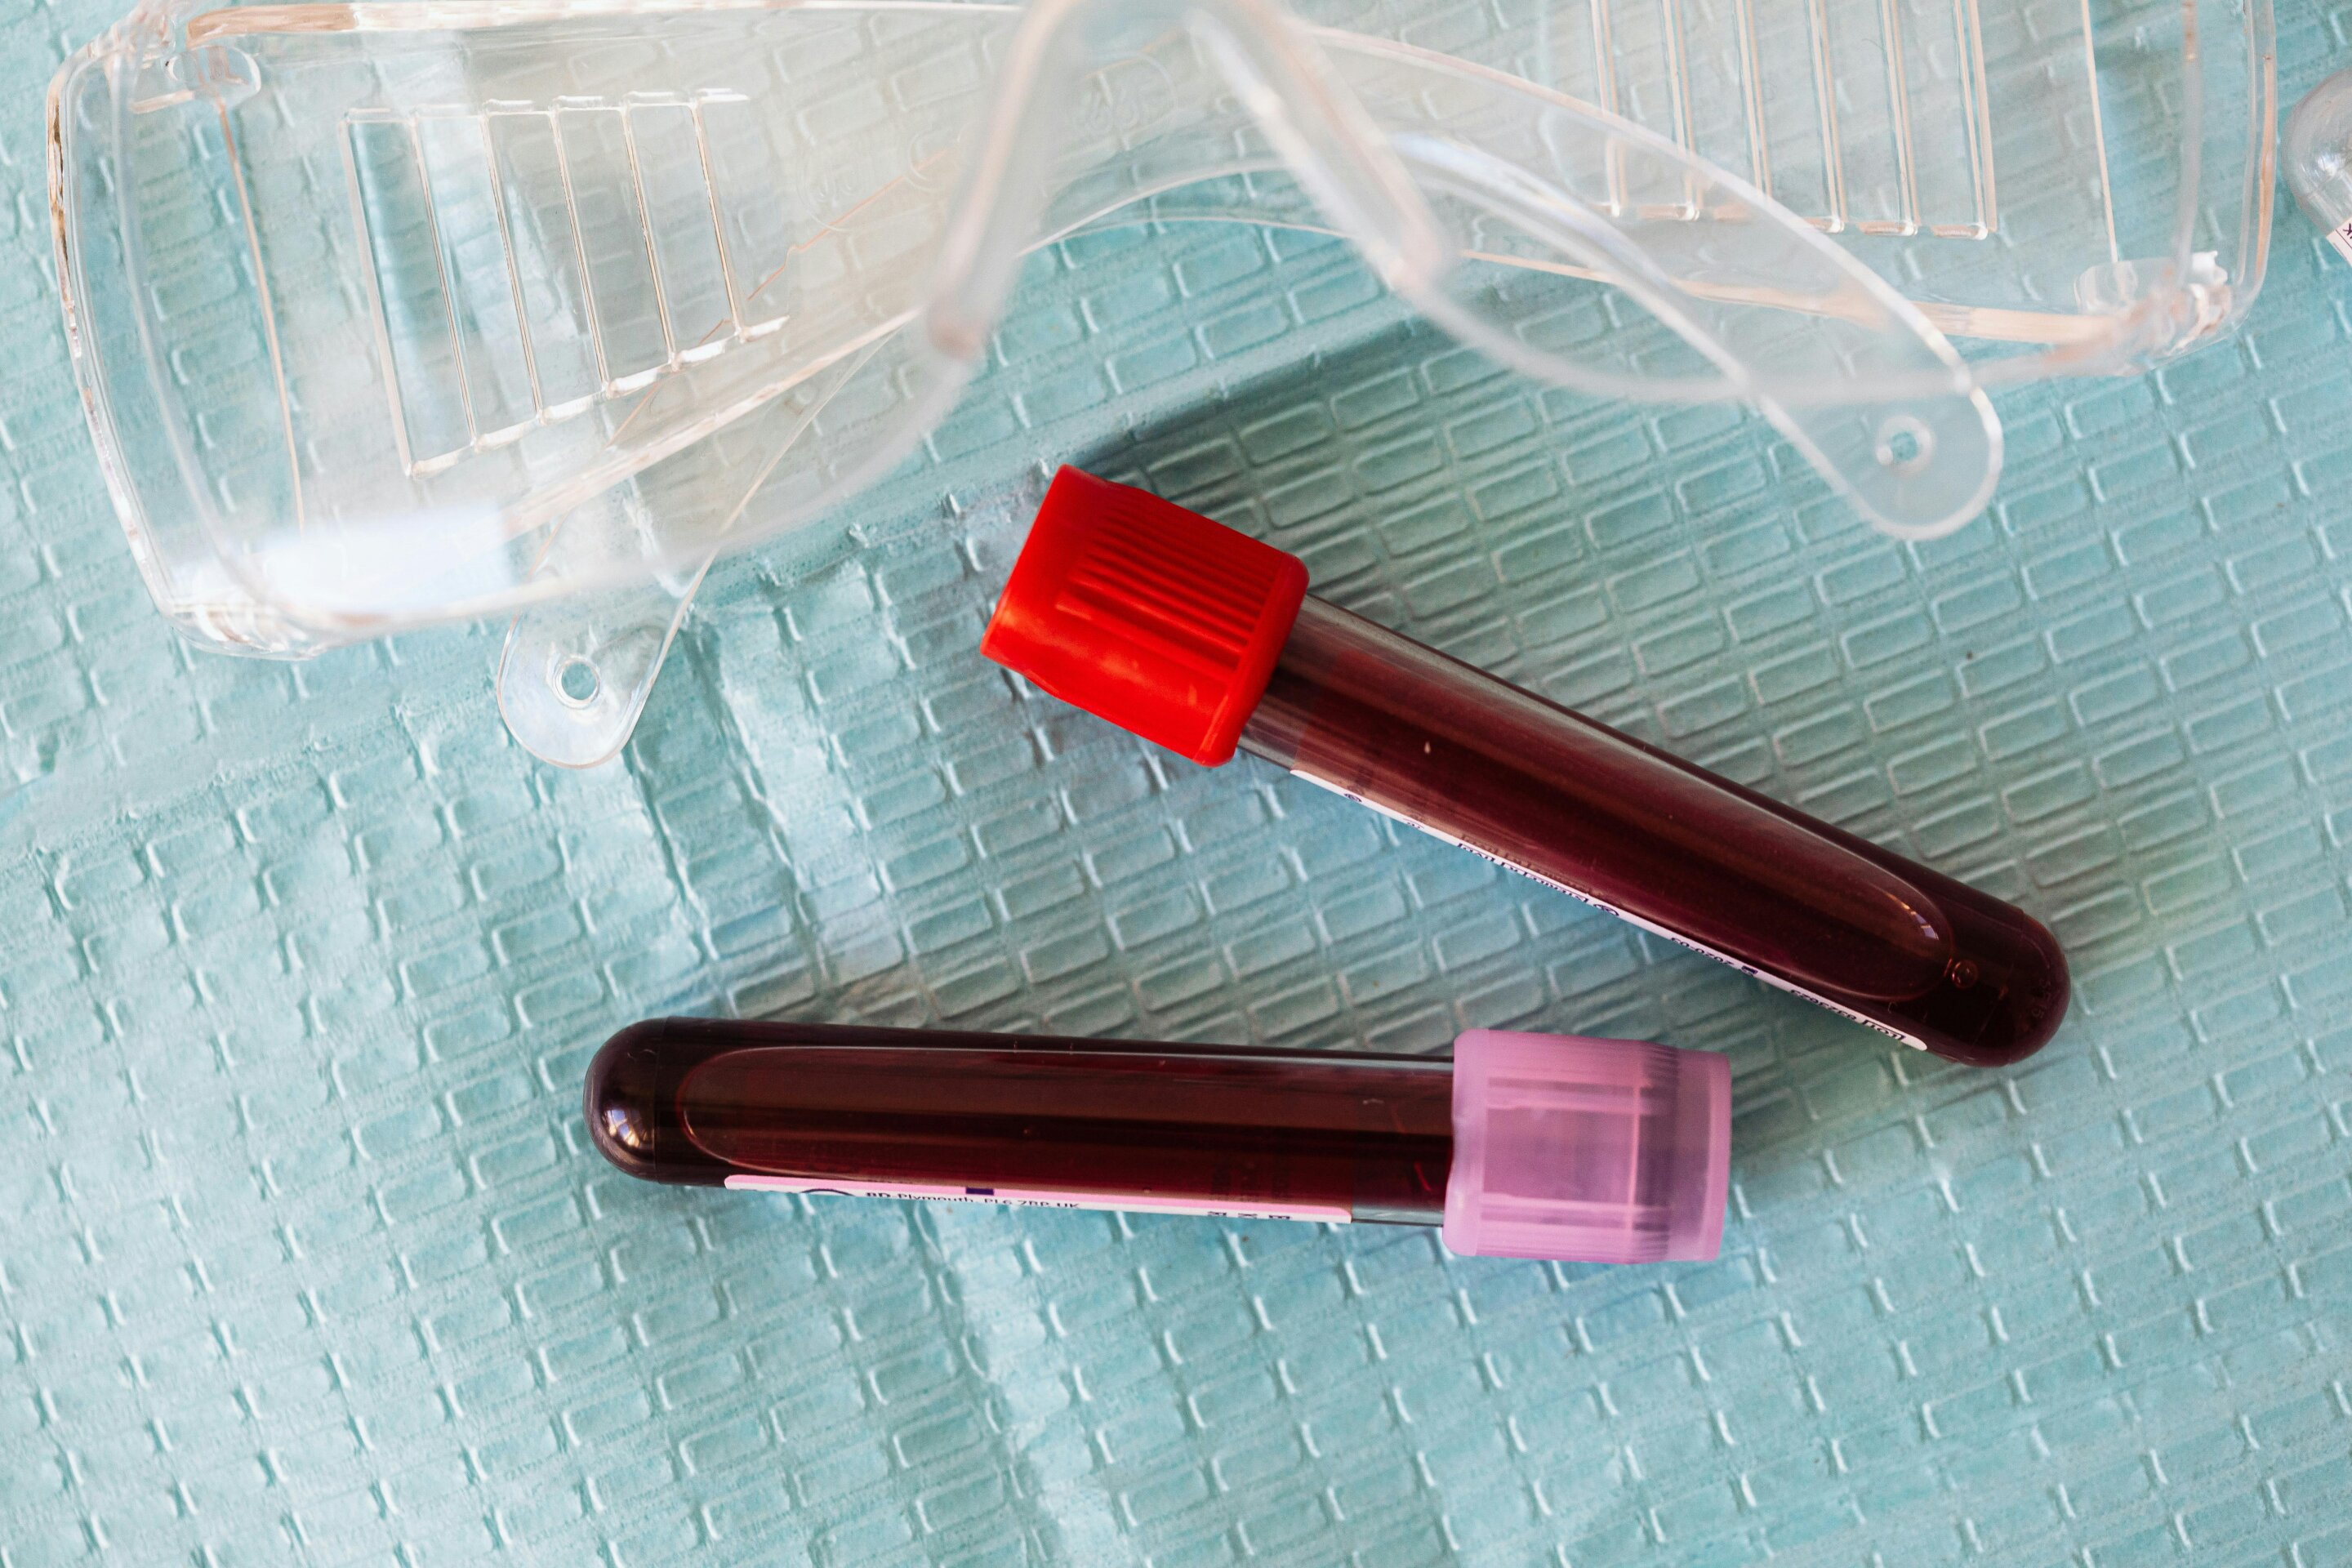 #Blood analysis predicts sepsis and organ failure in children